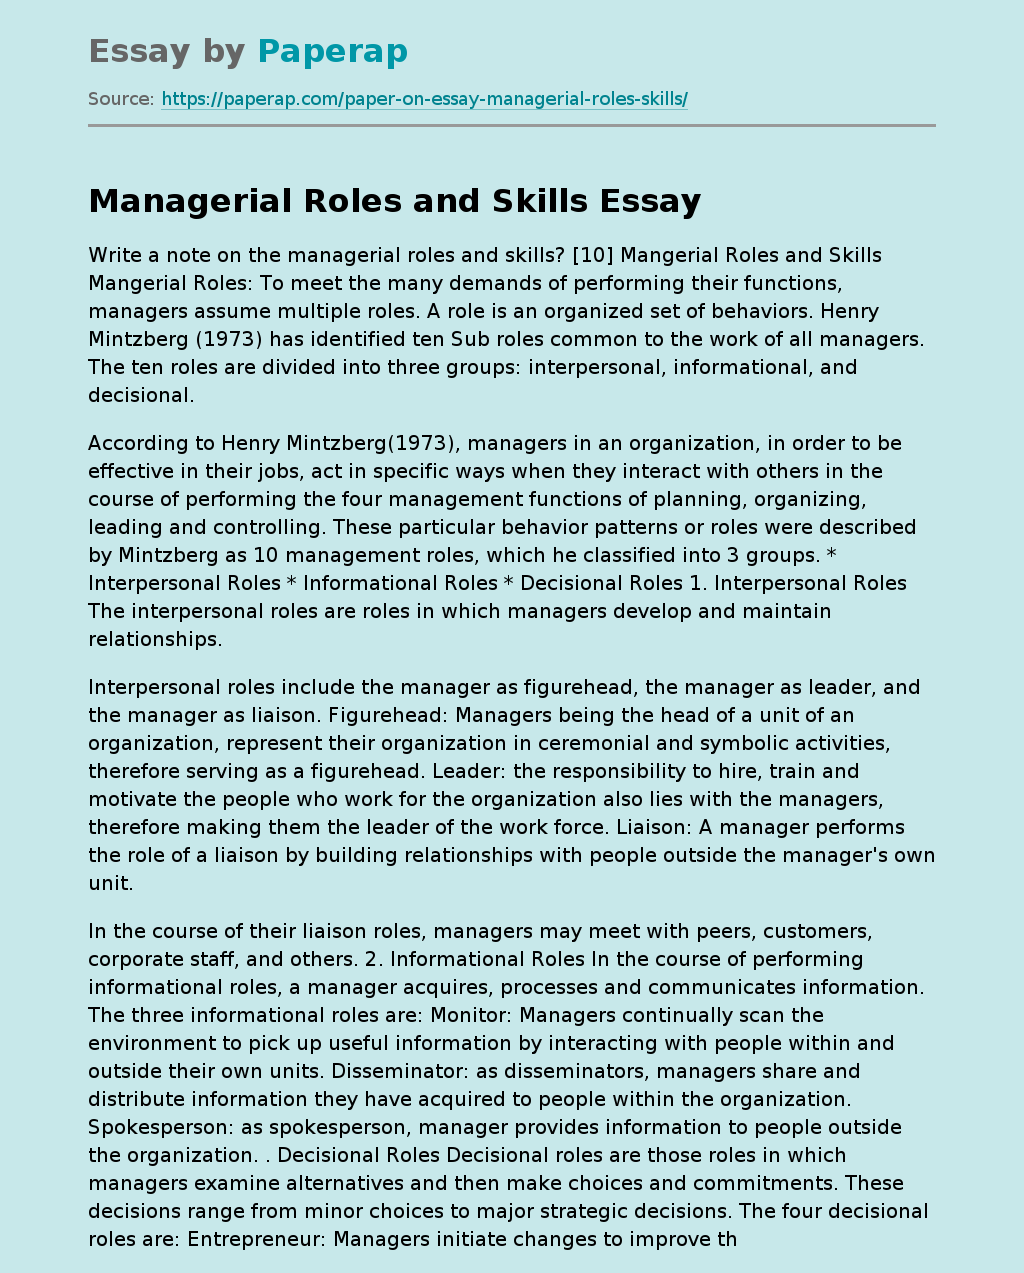 Managerial Roles and Skills